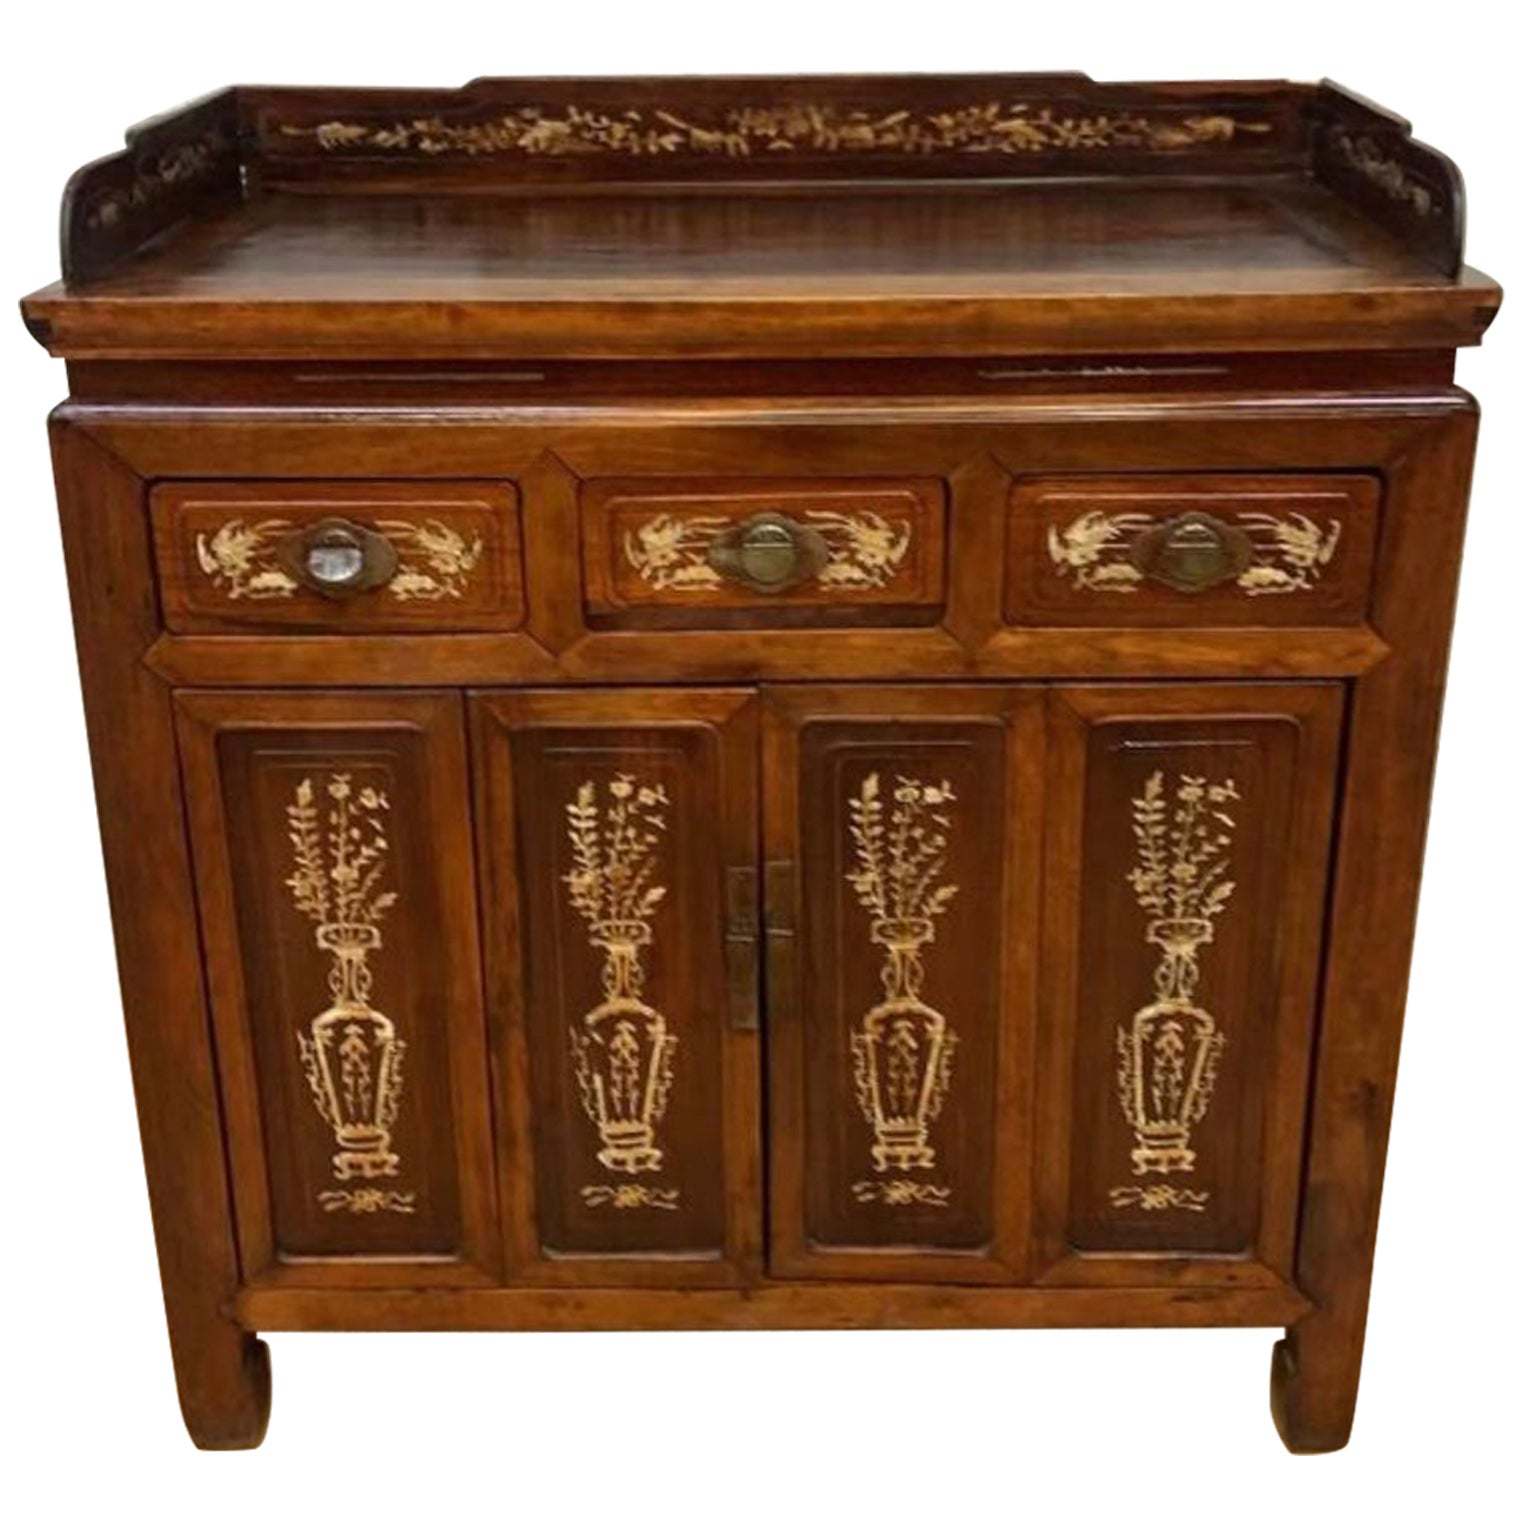 Antique Chinese Jiangsu Province Rosewood with Bone Inlay Sideboard Cabinet For Sale